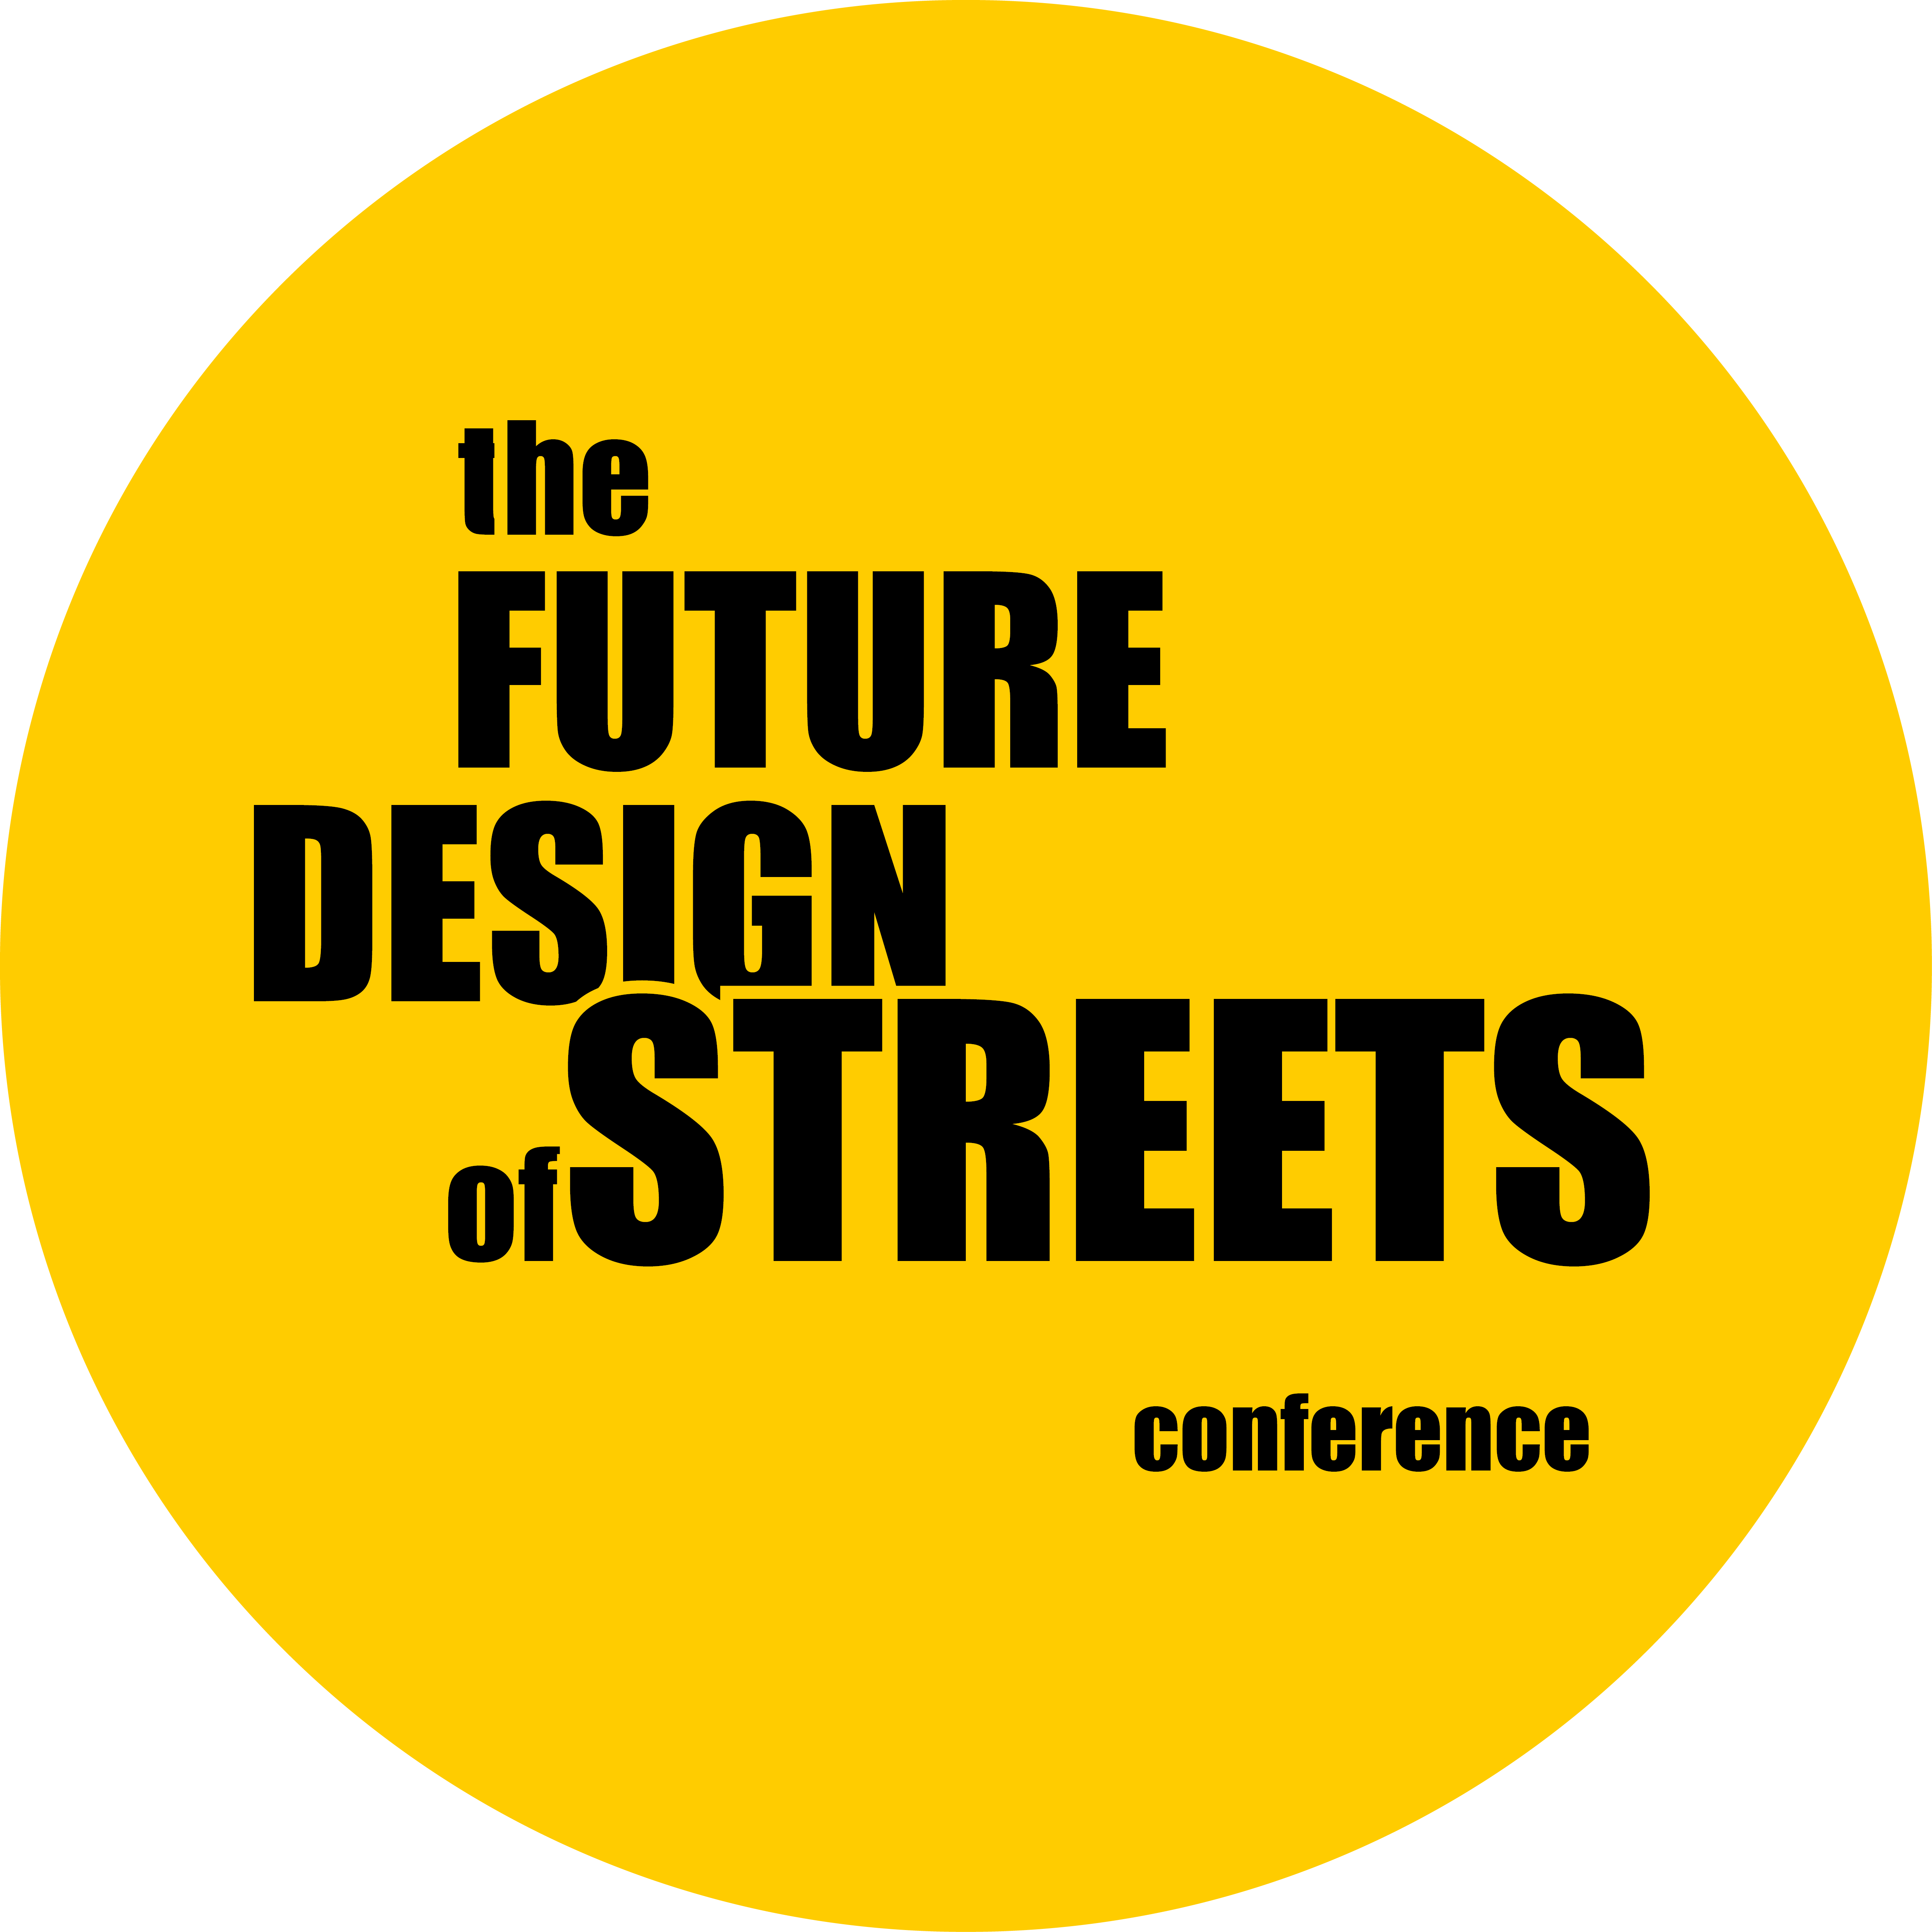 1st International Conference The Future Design of Streets image